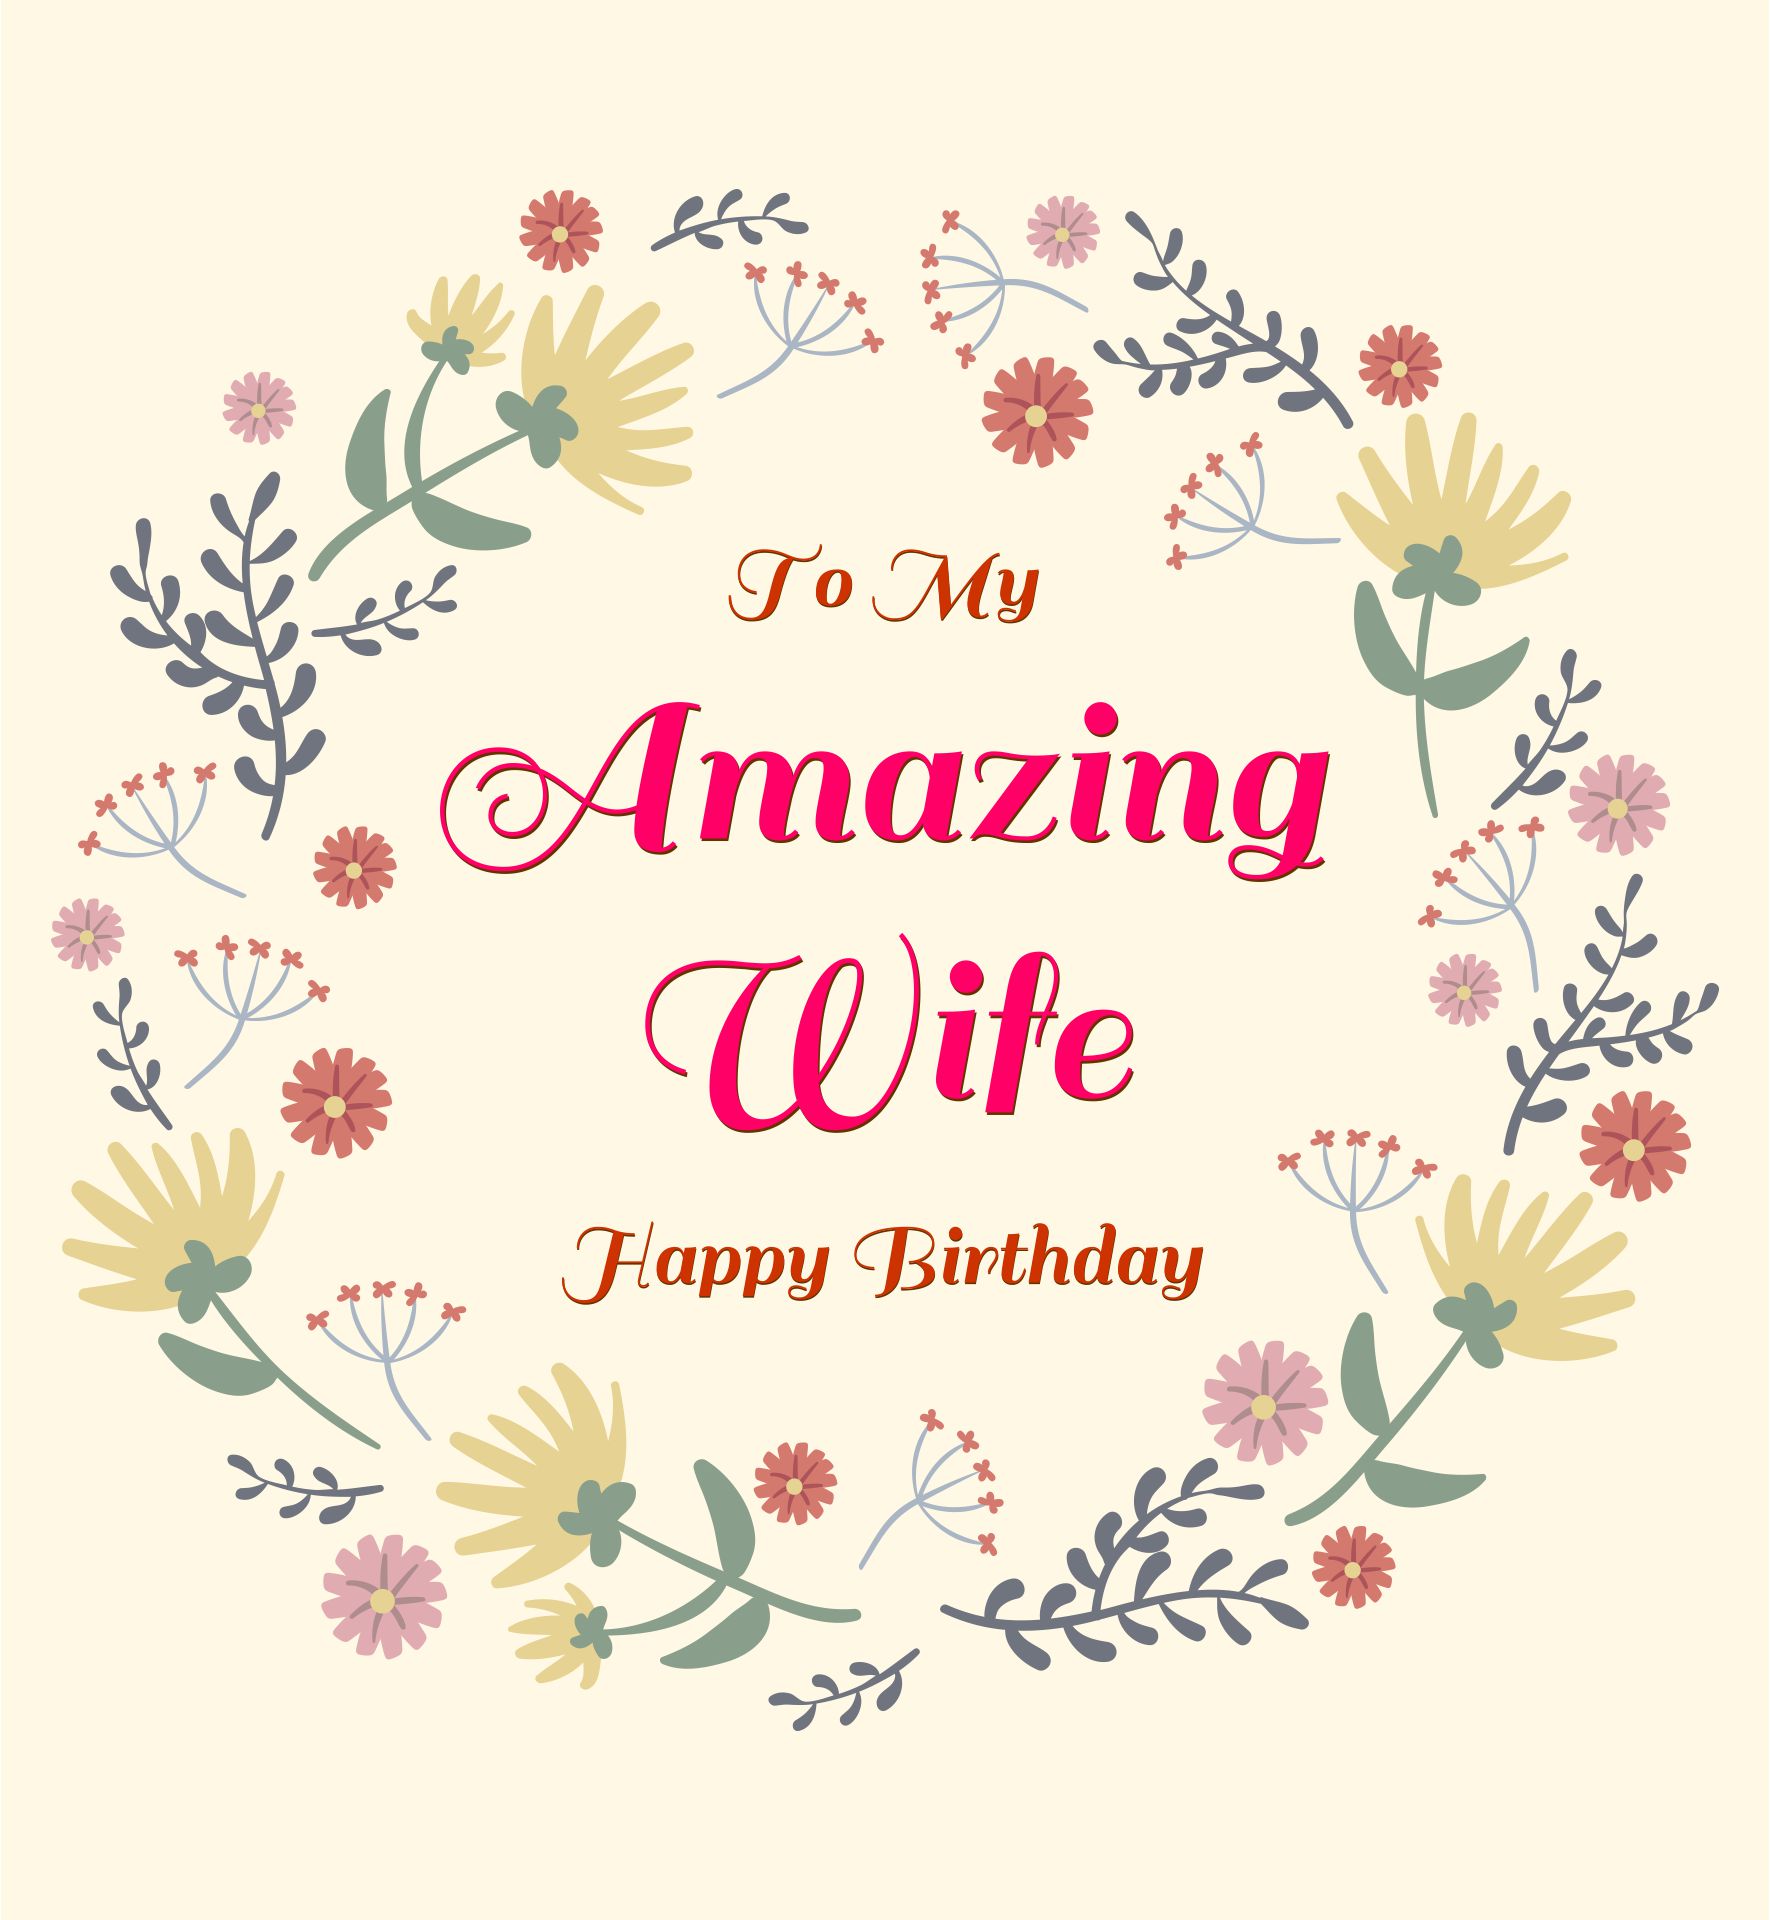 5 Best Printable Cards For Wife - printablee.com